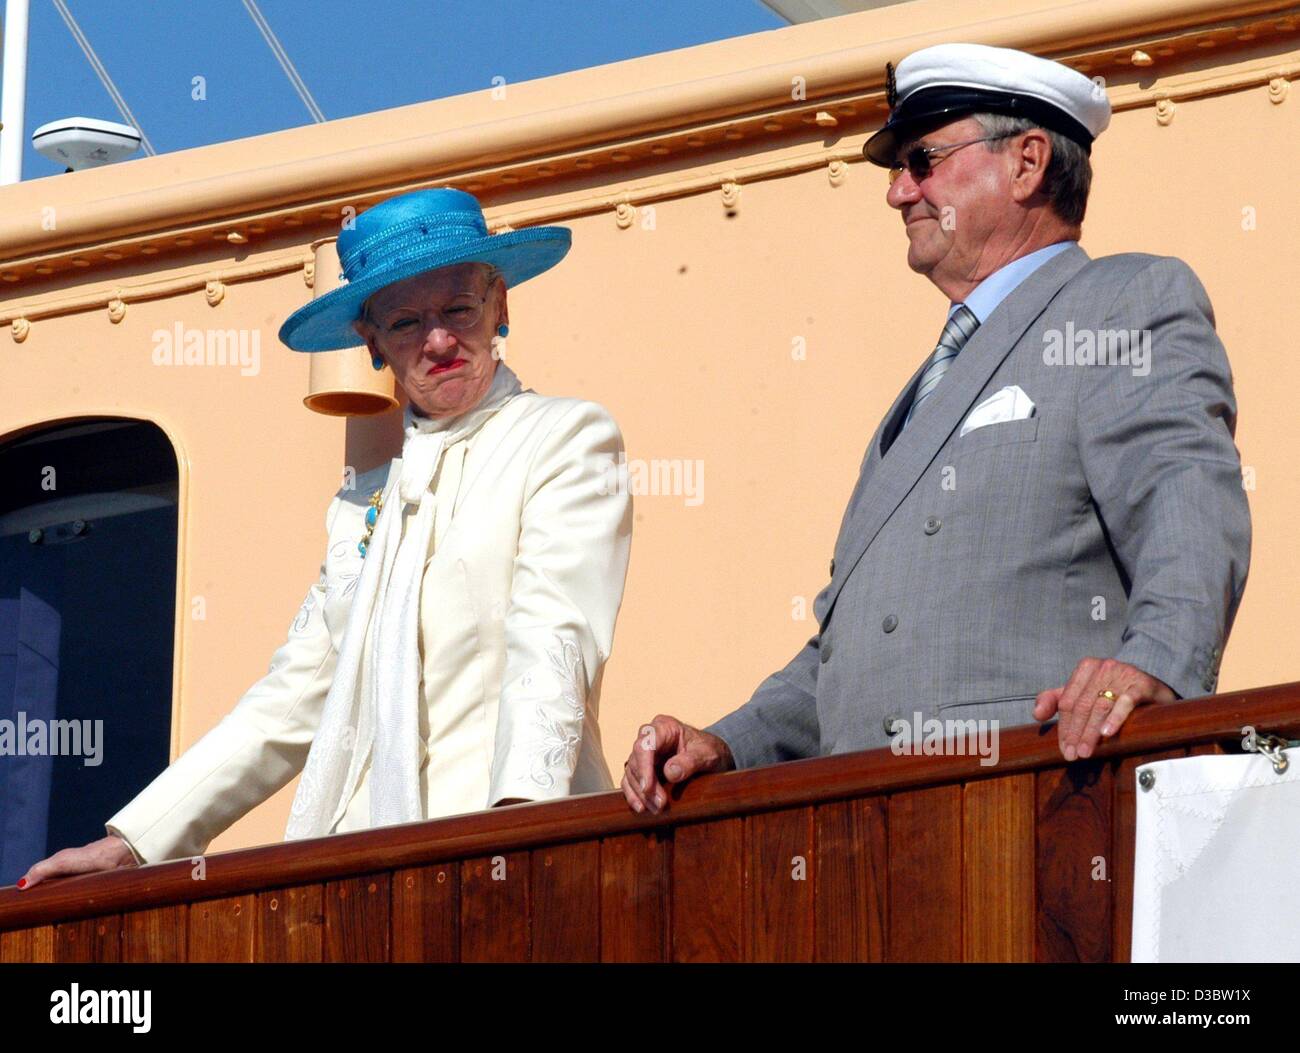 (dpa) - Queen Margrethe II of Denmark and her husband Prince Henrik stand on the deck of the royal yacht Dannebrog upon their arrival in Luebeck, Germany, 5 September 2003. Luebeck is the first stop of the Danish royal couple who are on an official visit to Germany. Stock Photo